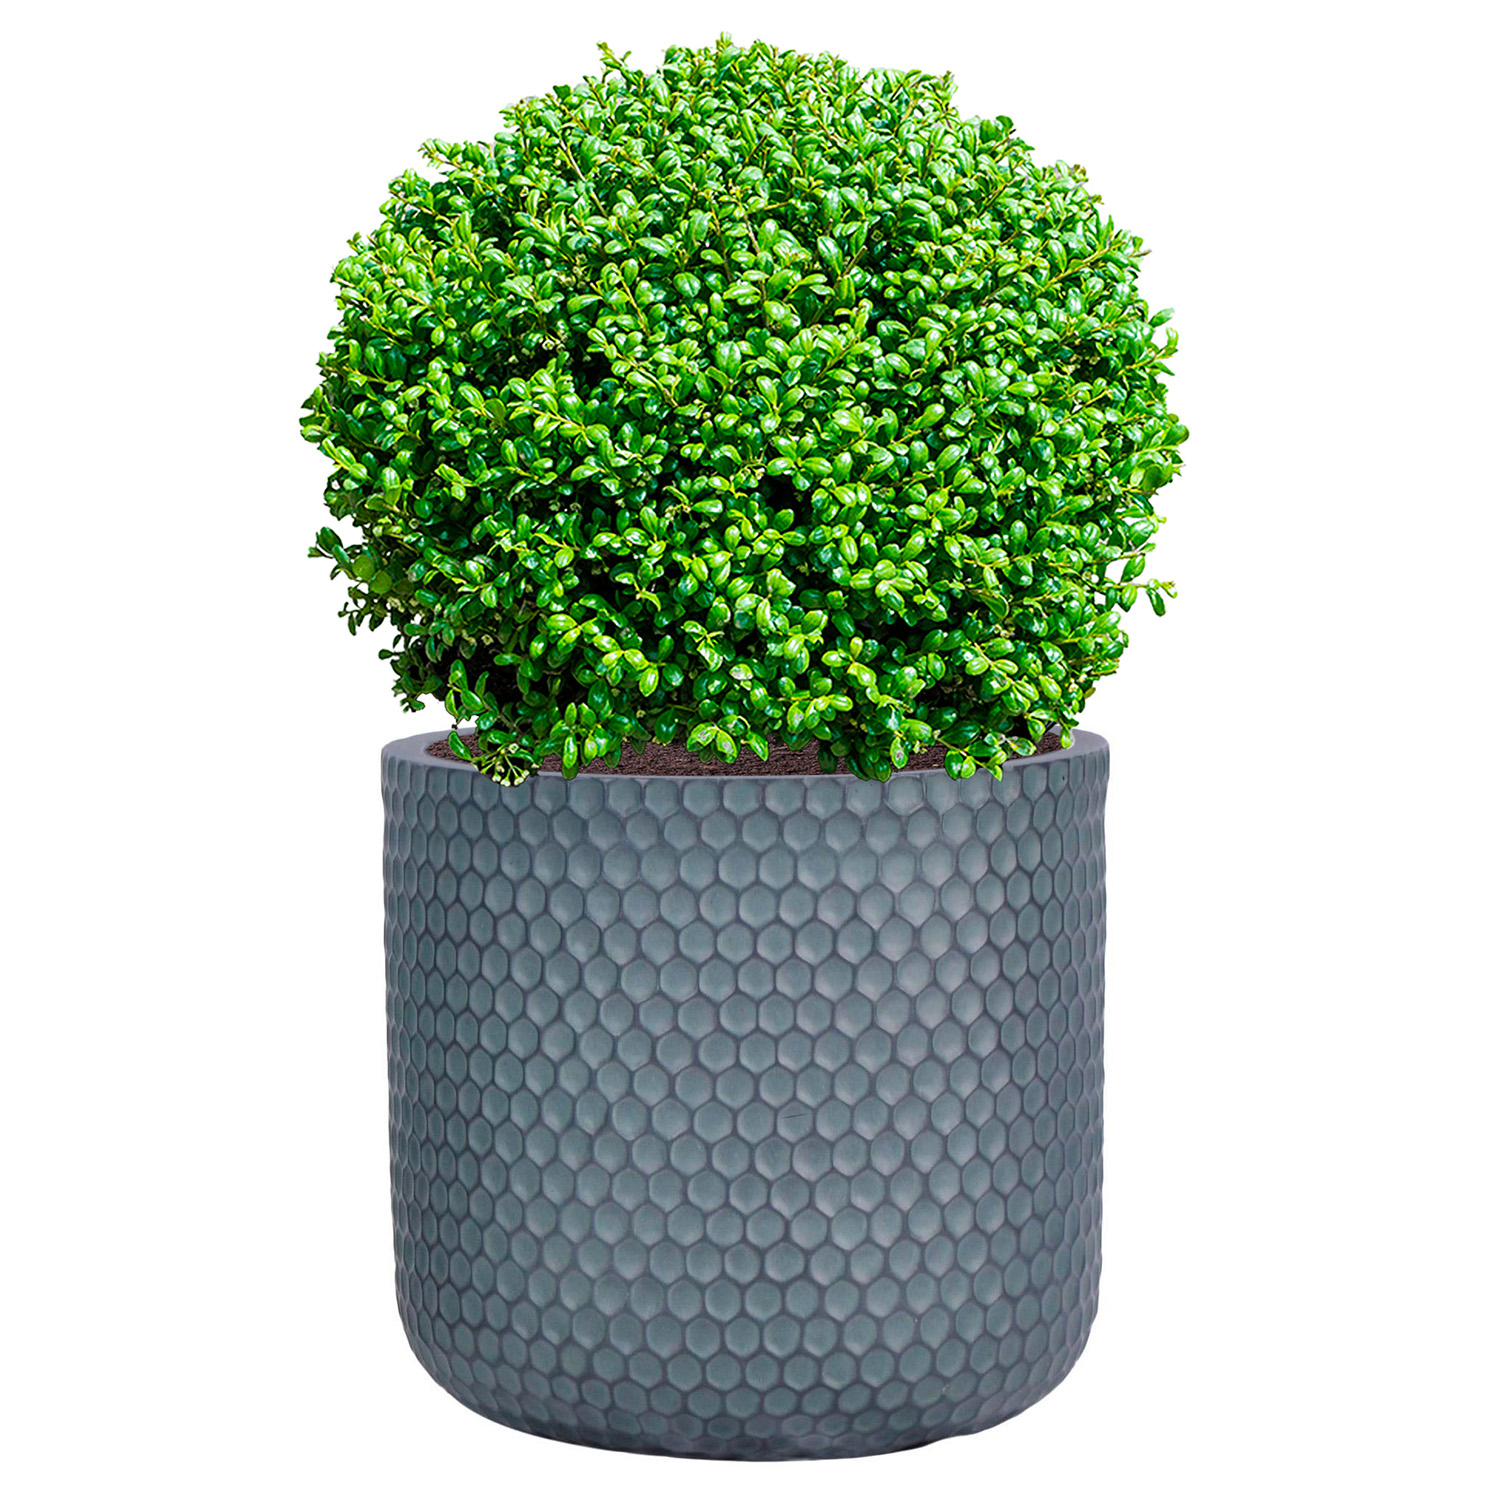 Honeycomb Style Slate Grey Cylinder Round Outdoor Planter D25 H23 cm, 11.3 ltrs Cap.